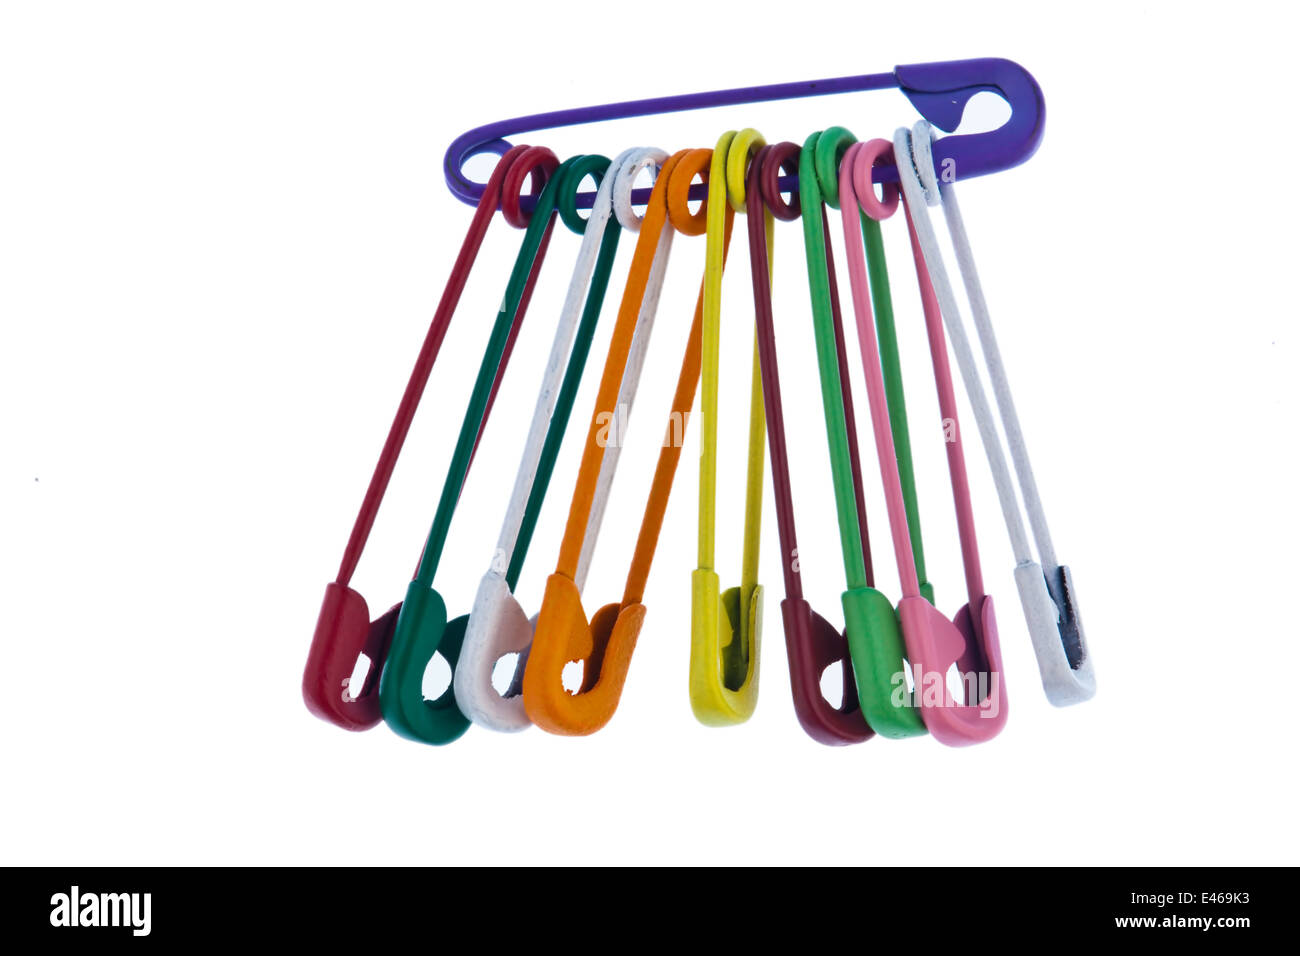 Lots of colorful safety pins lying on a white background Stock Photo